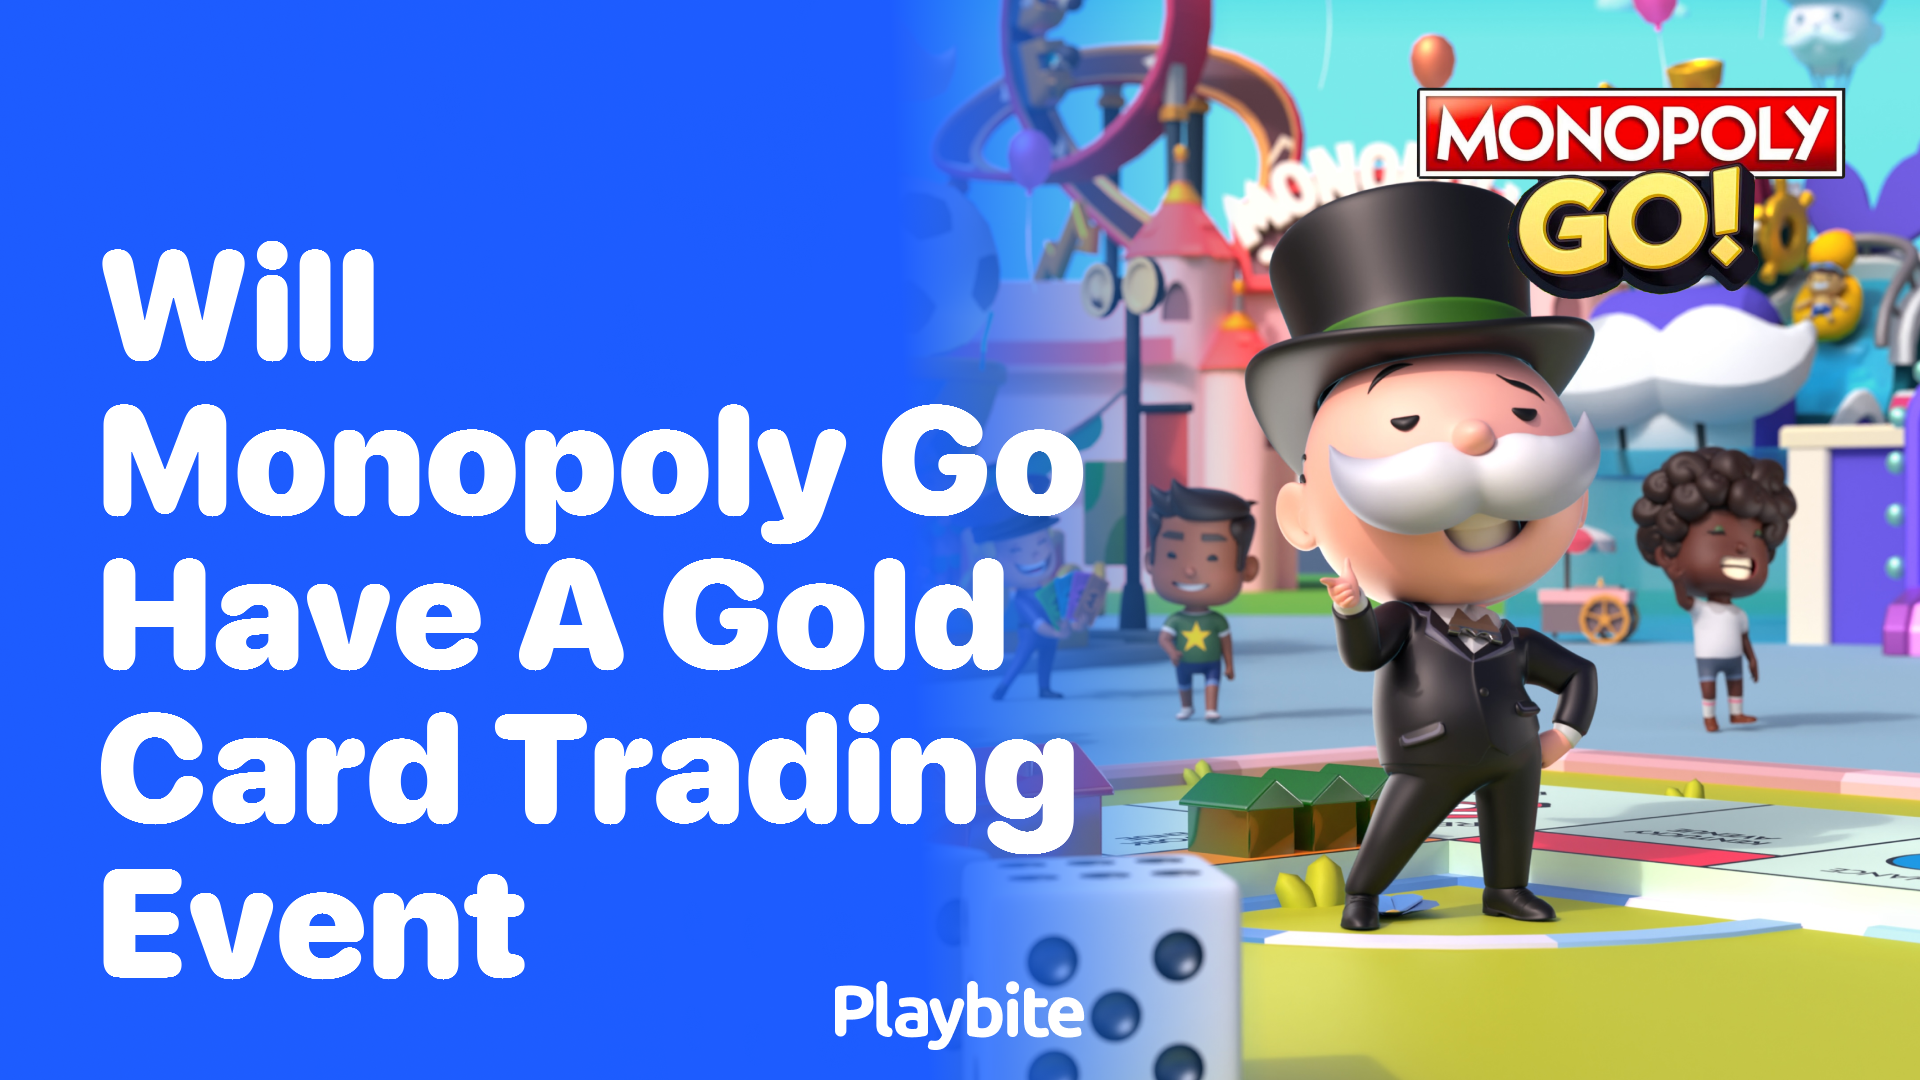 Will Monopoly Go Have a Gold Card Trading Event?